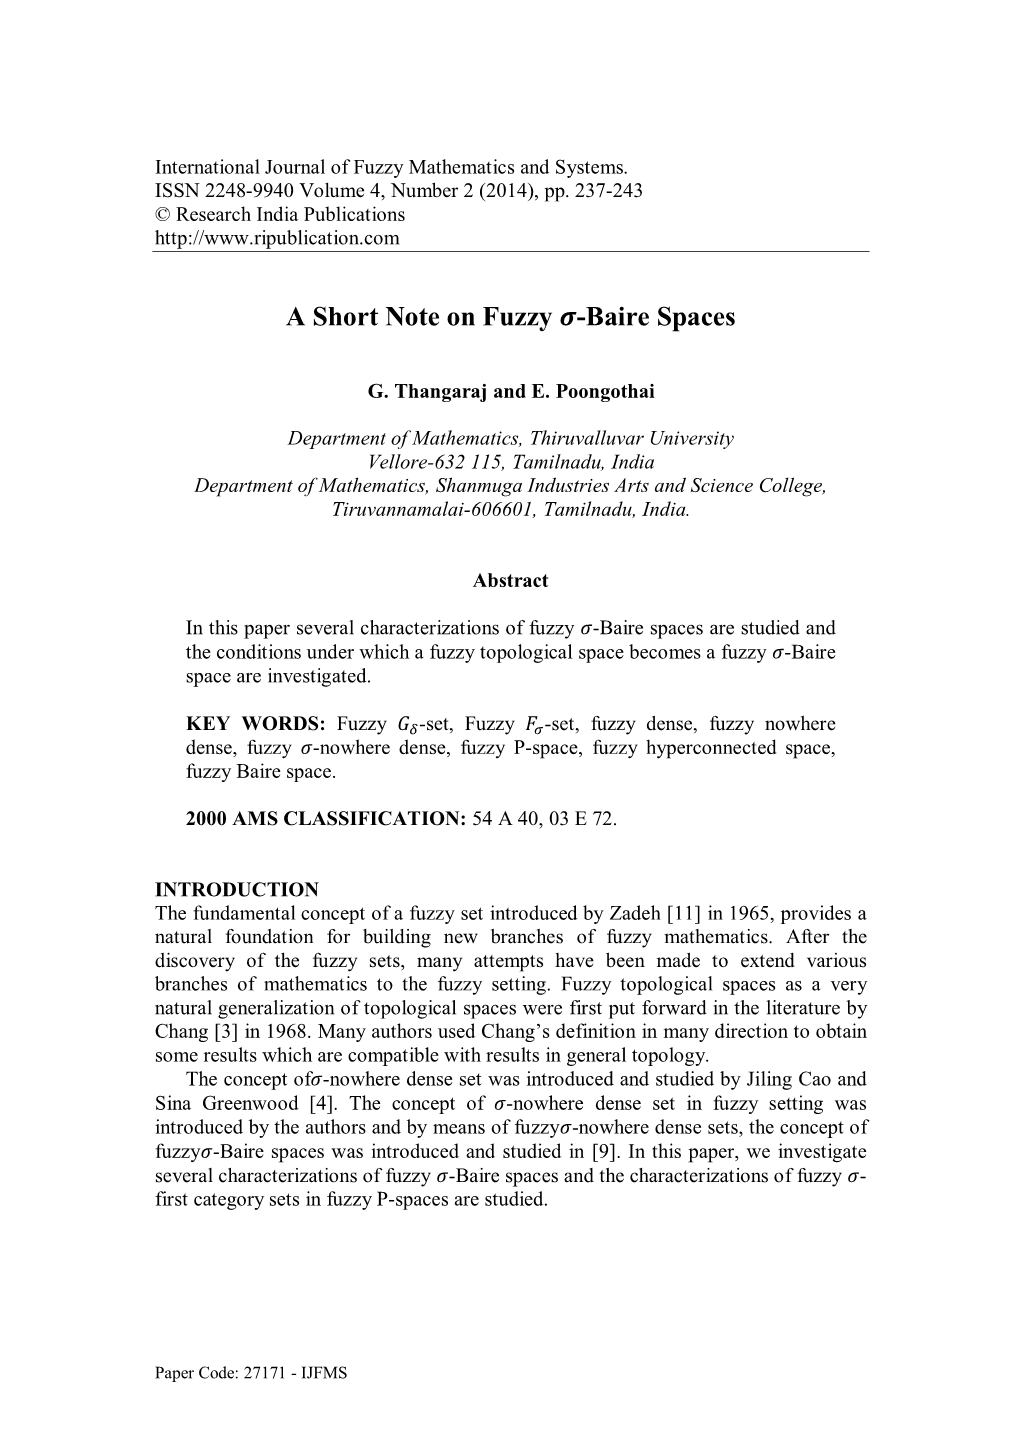 A Short Note on Fuzzy -Baire Spaces